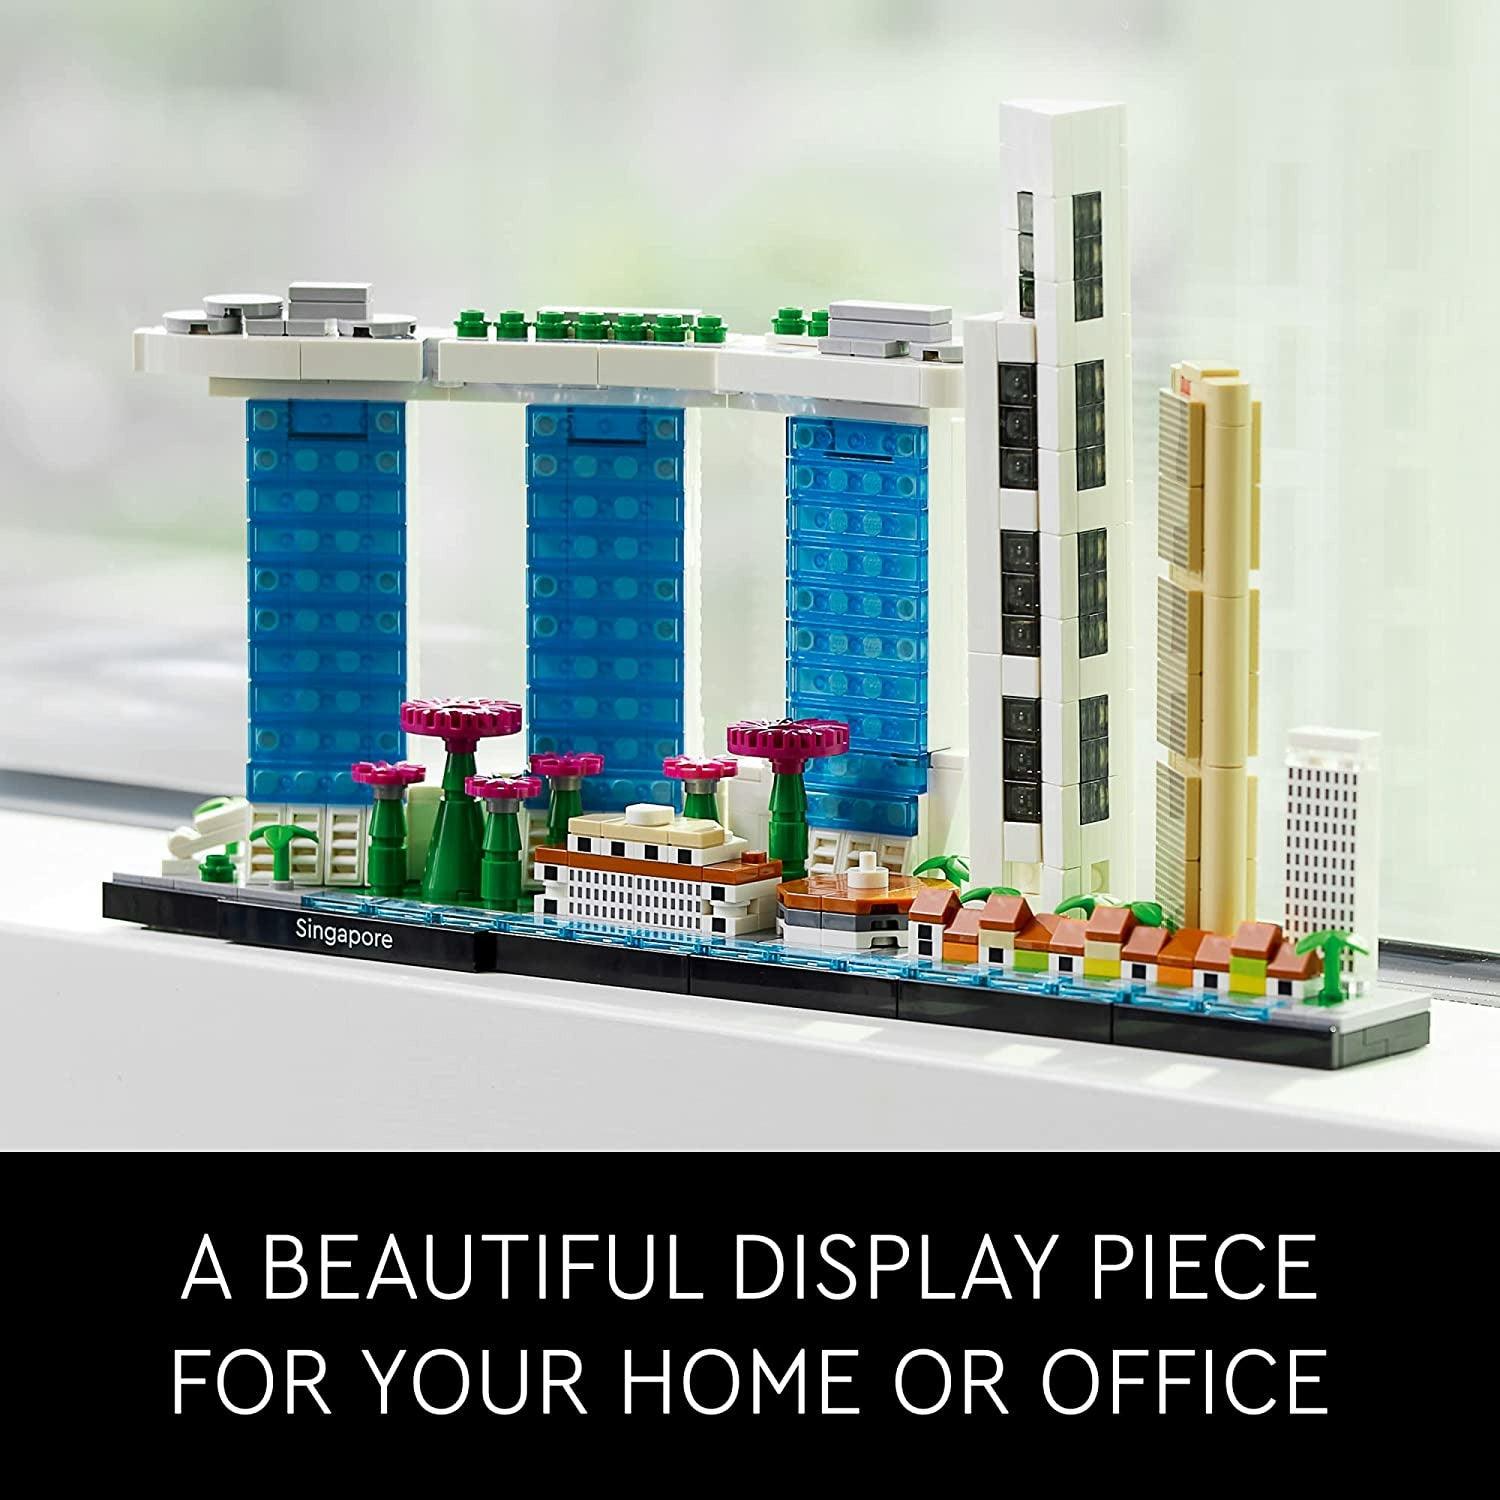 LEGO 21057 Architecture Skyline Collection Singapore Building Kit Collectible Display 827 Pieces - BumbleToys - 18+, Architecture, Boys, Girls, LEGO, OXE, Pre-Order